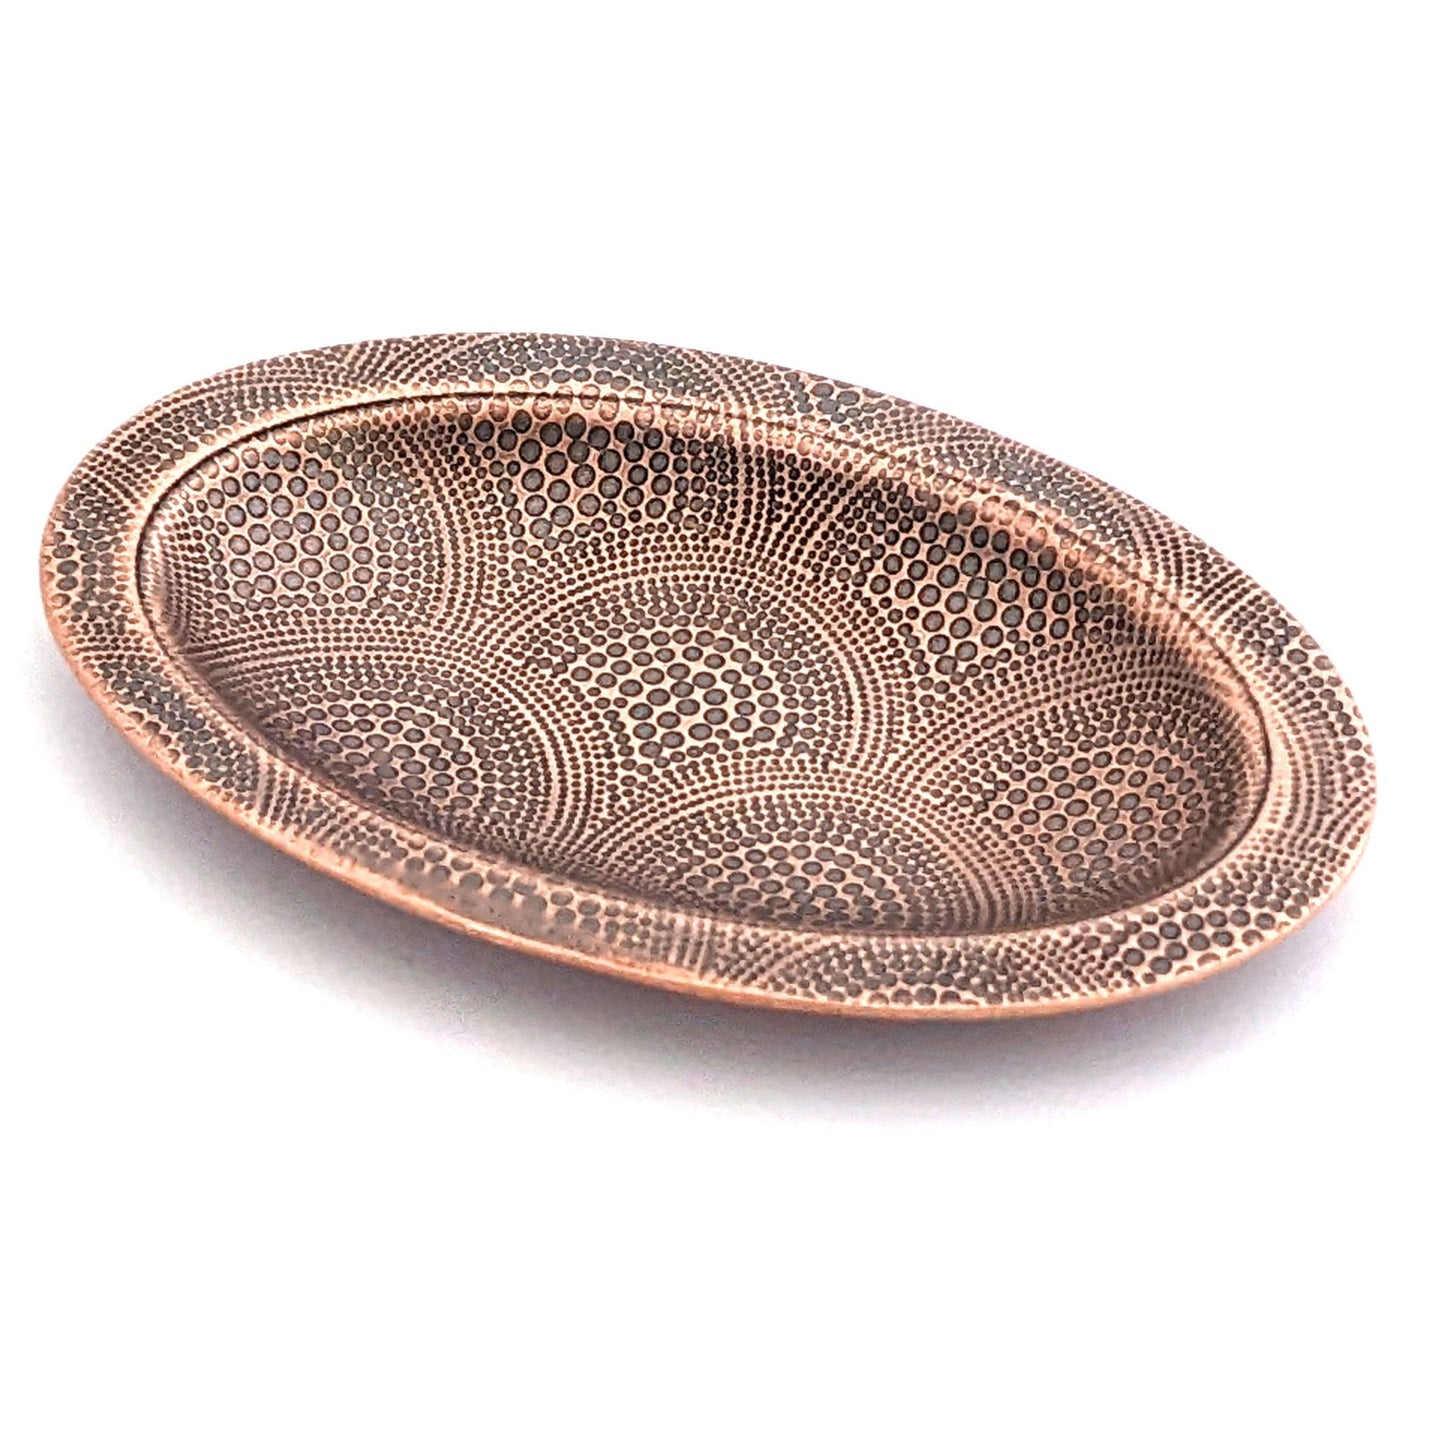 Copper oval ring dish with repeating pattern of dotted arches.  Dish is 2 inches by three inches with a raised lip.